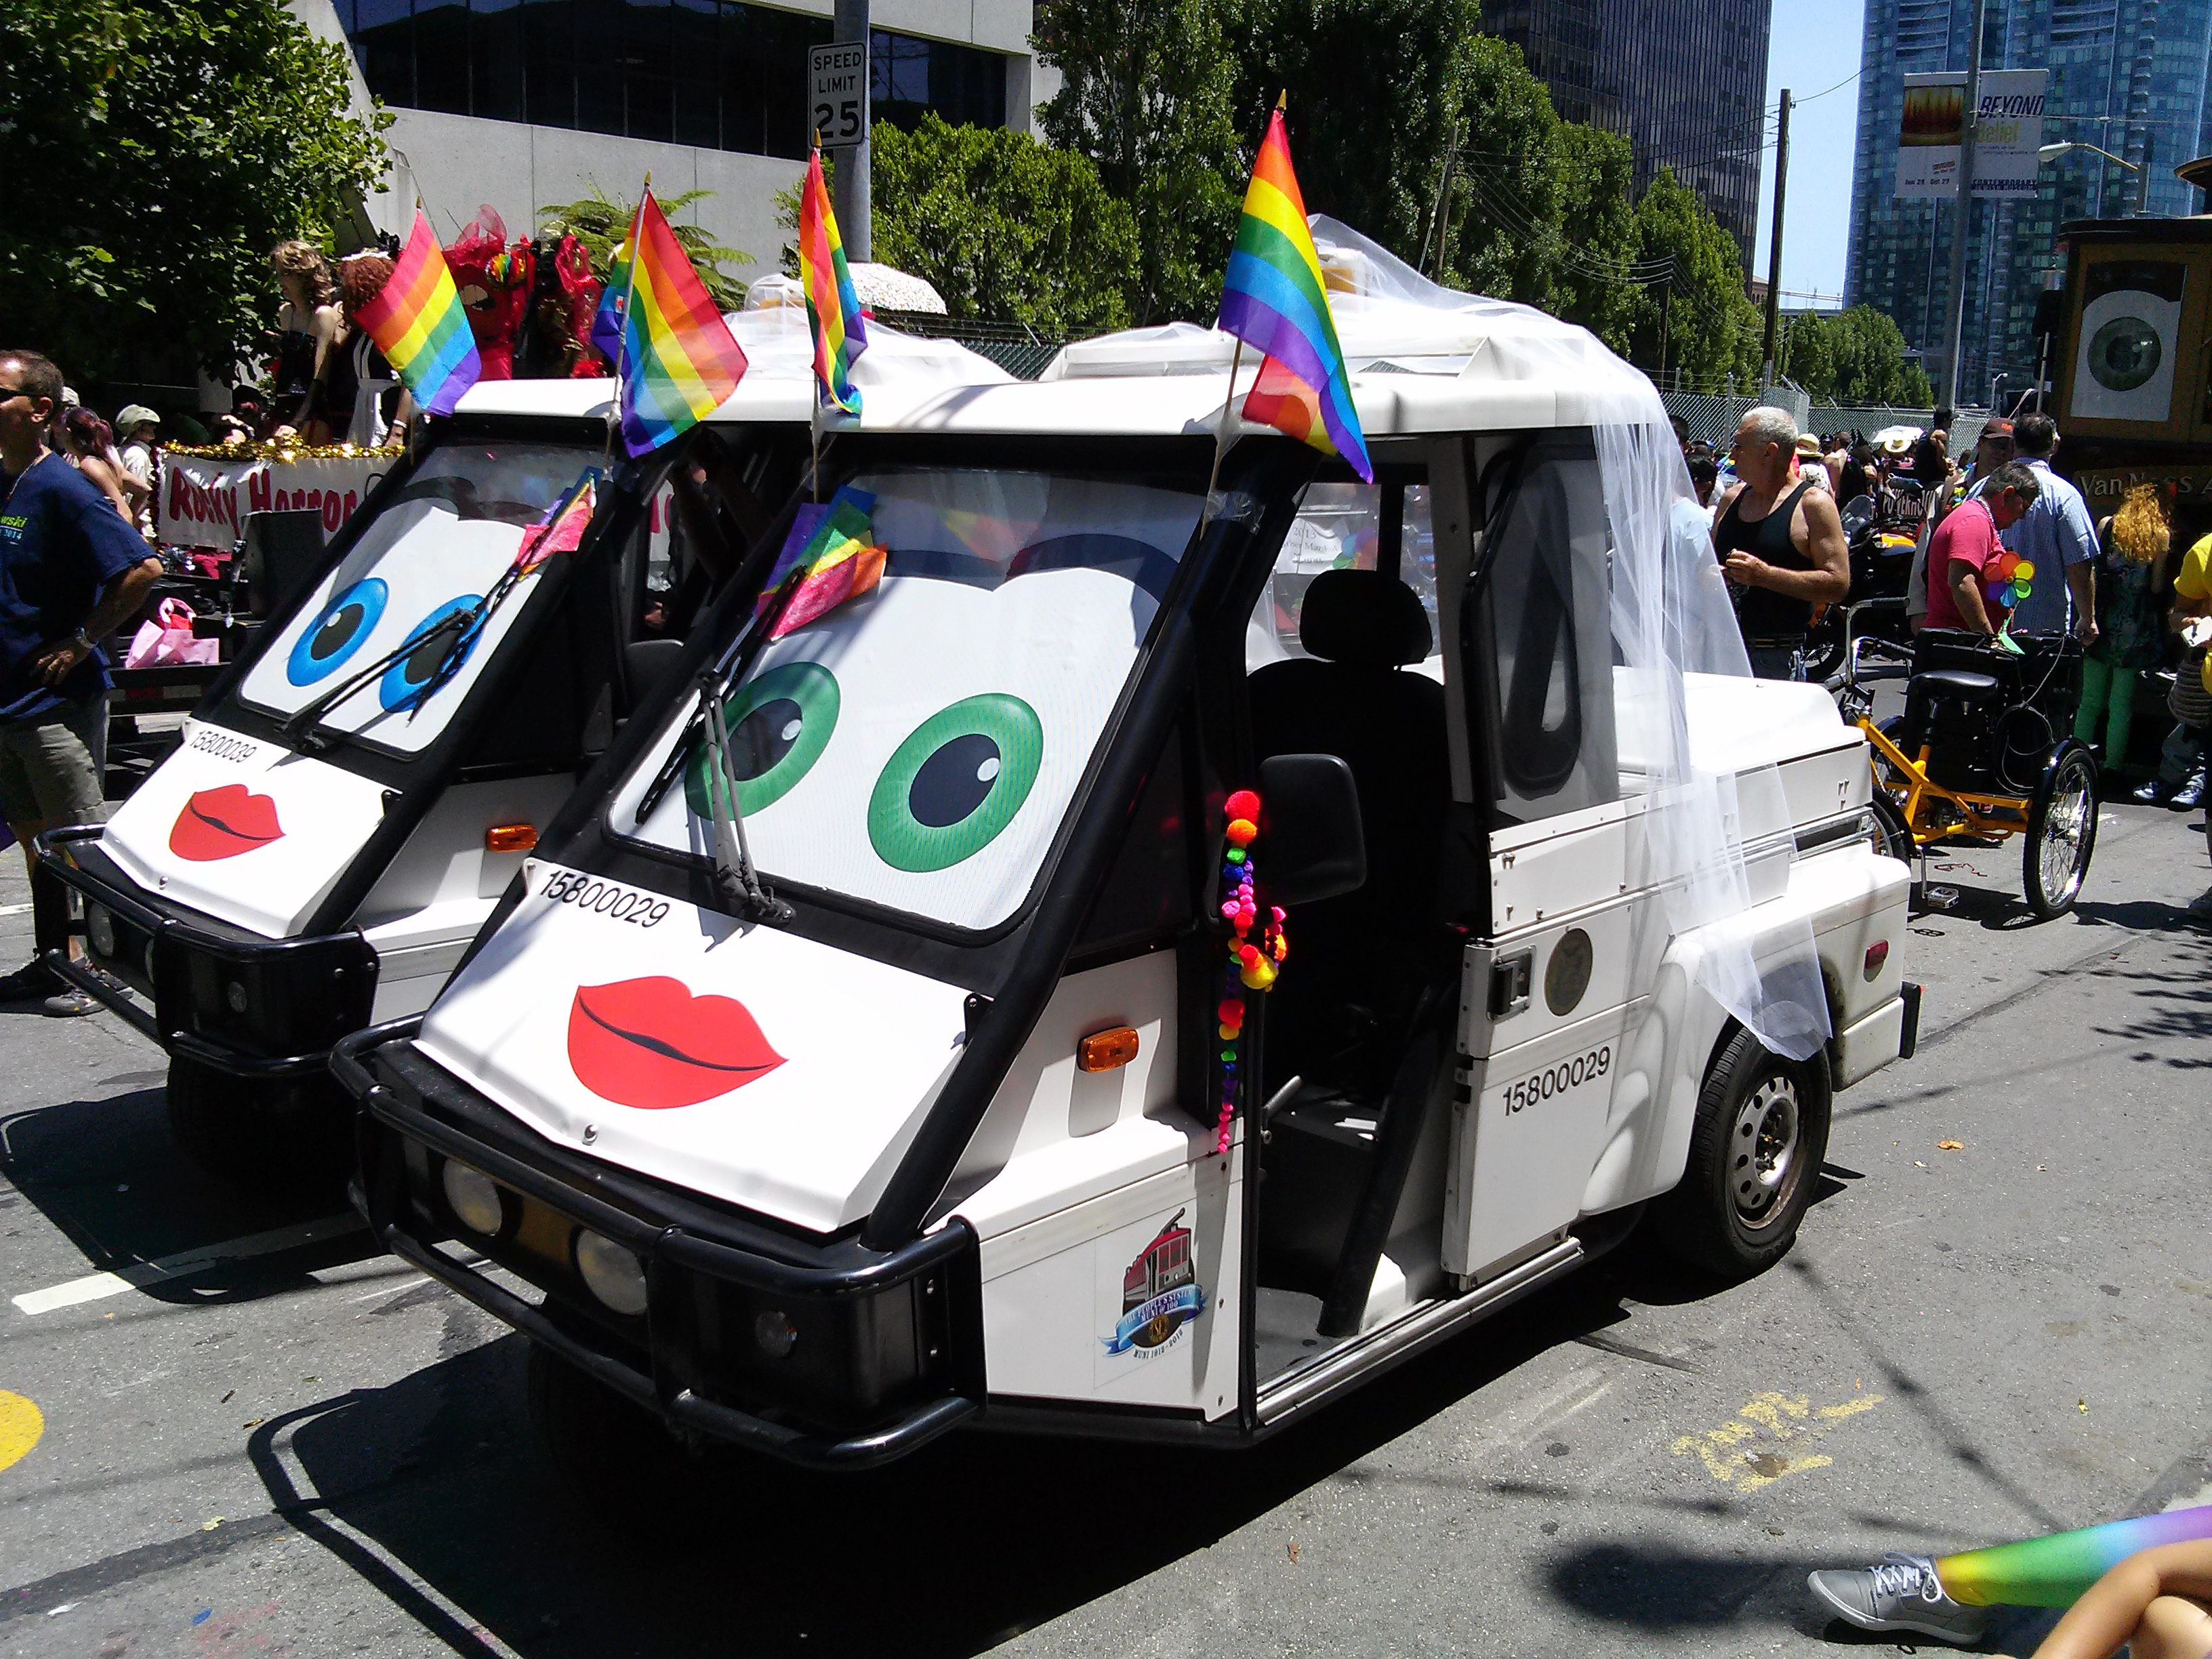 Two parking control white, three-wheeled vehicles decorated with anthropomorphic eyes and lips sport wedding veils and rainbow flags.